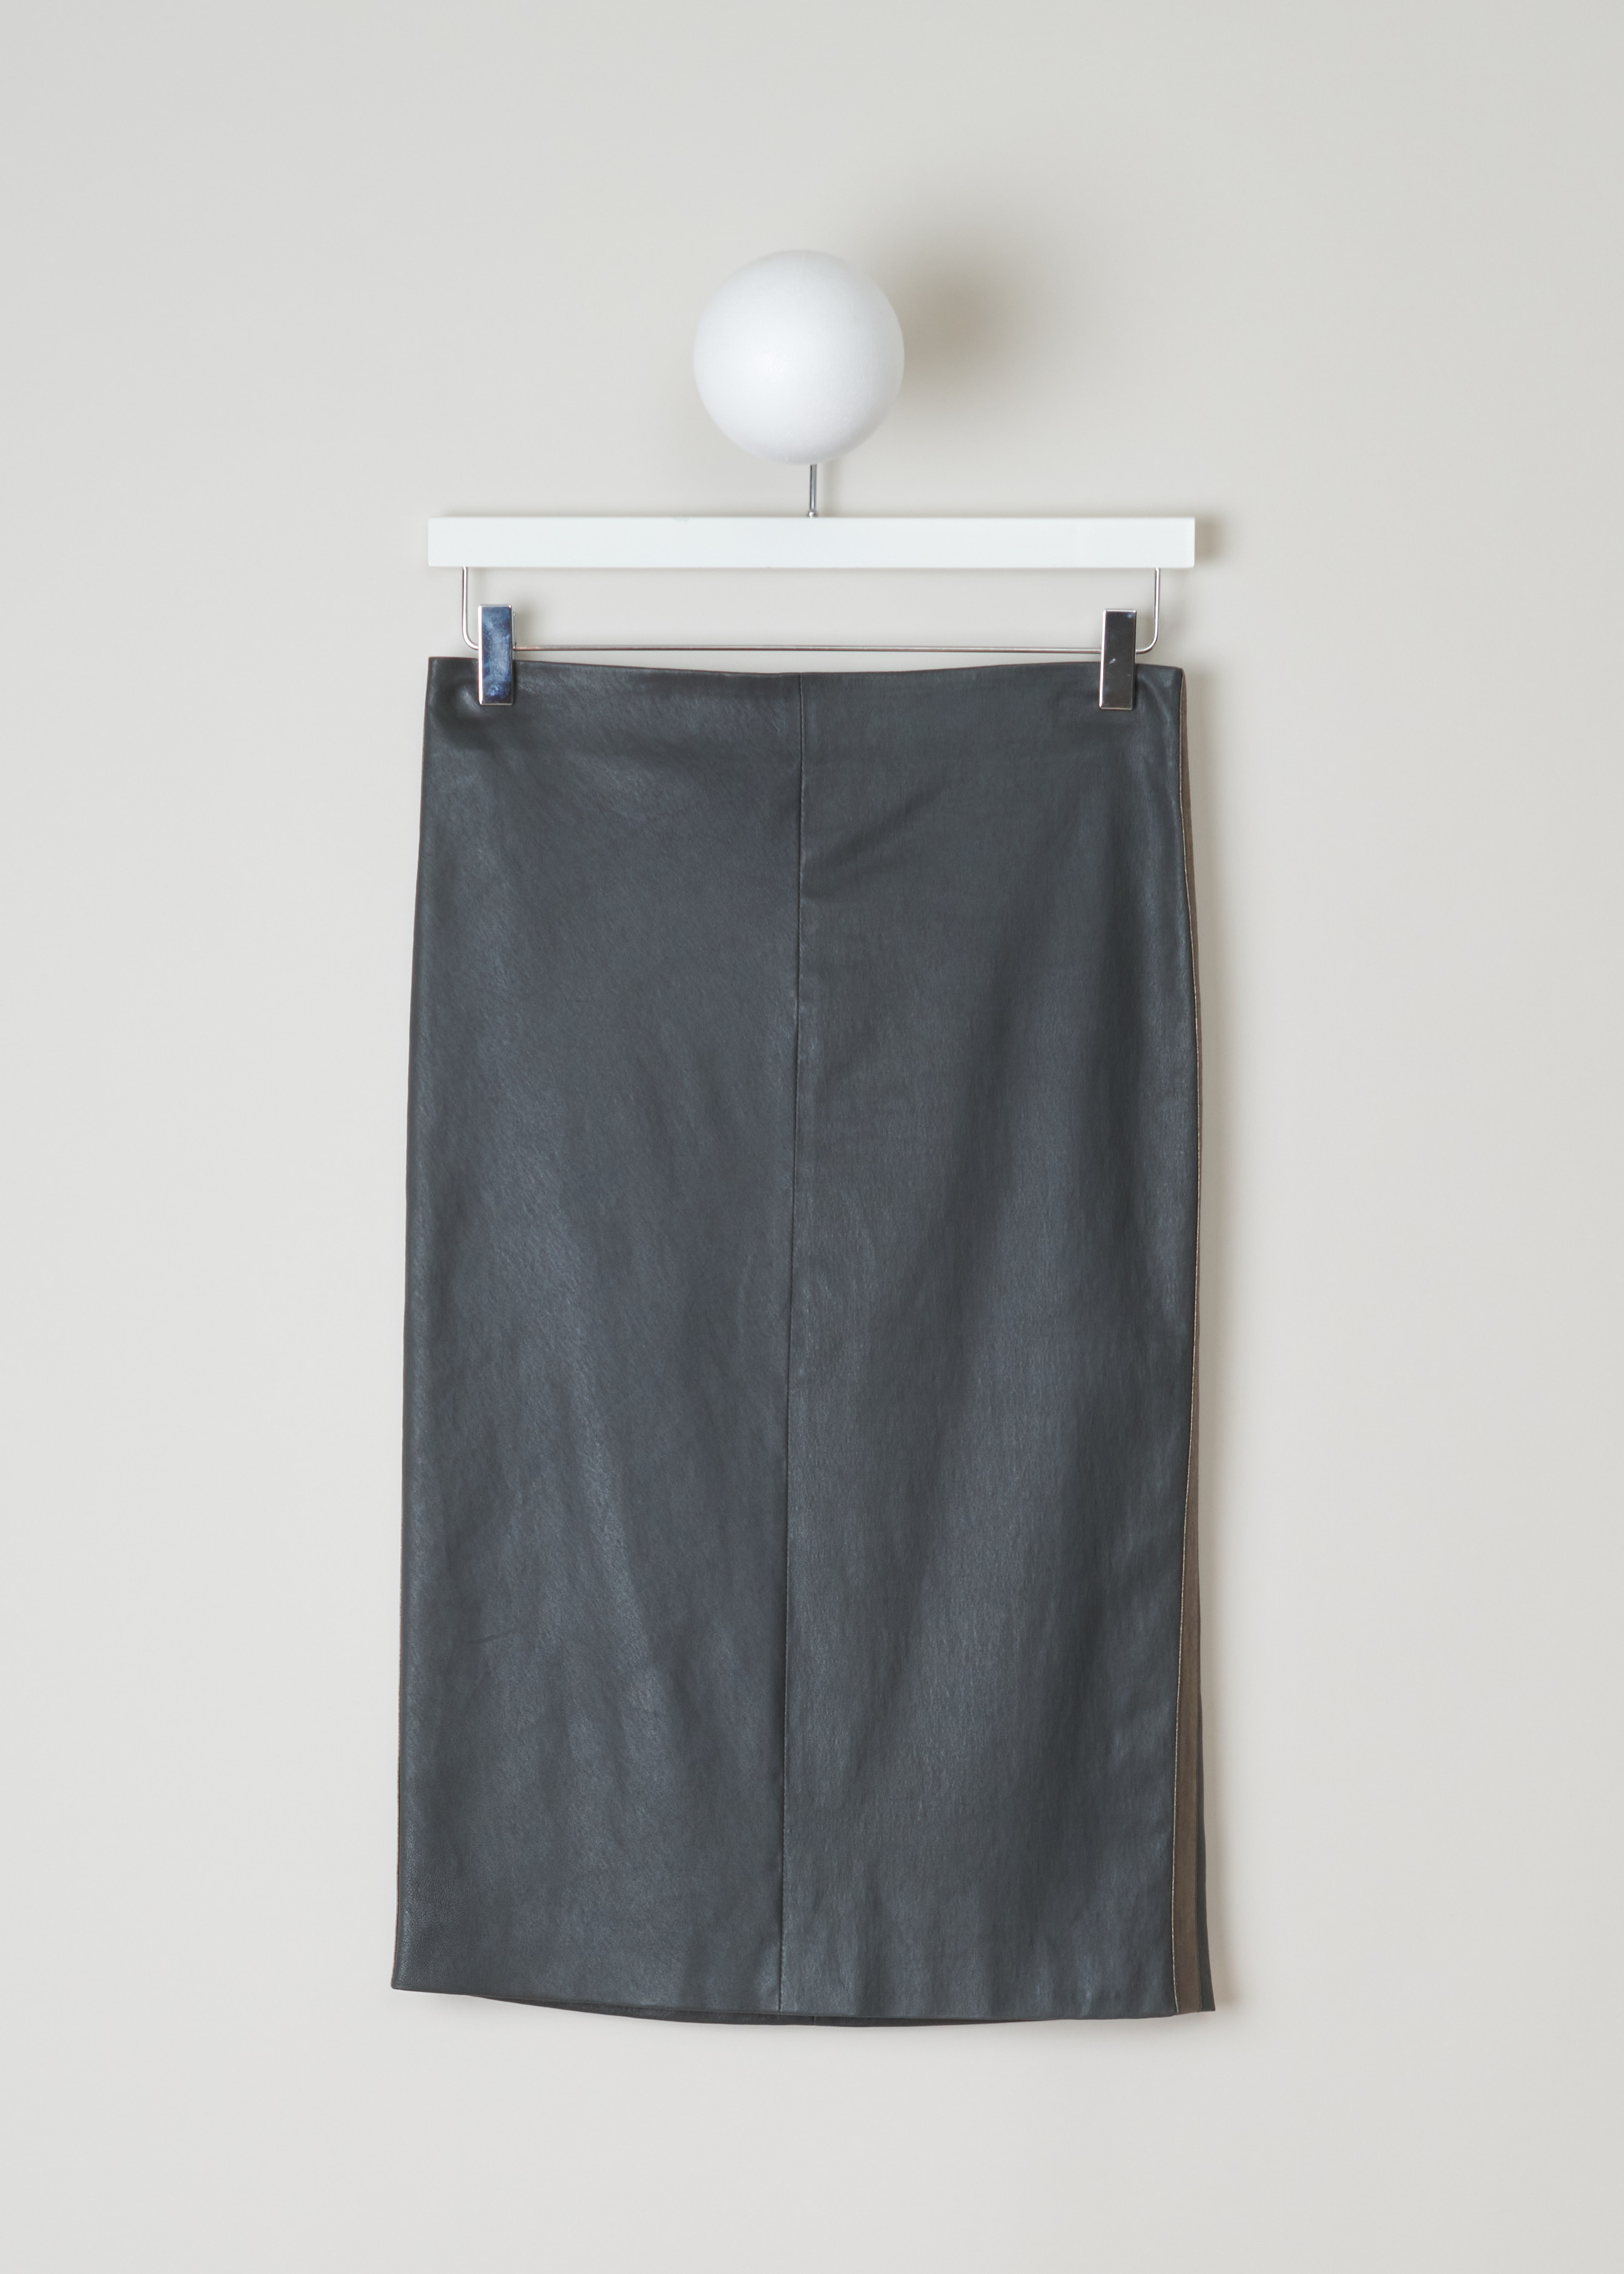 Brunello Cucinelli Grey leather skirt, M0V32G2584_CS896 grey front. Leather skirt with a light stretch, Has a knee-length, metallic beading on the sides and an invisible zipper fastening on the back.